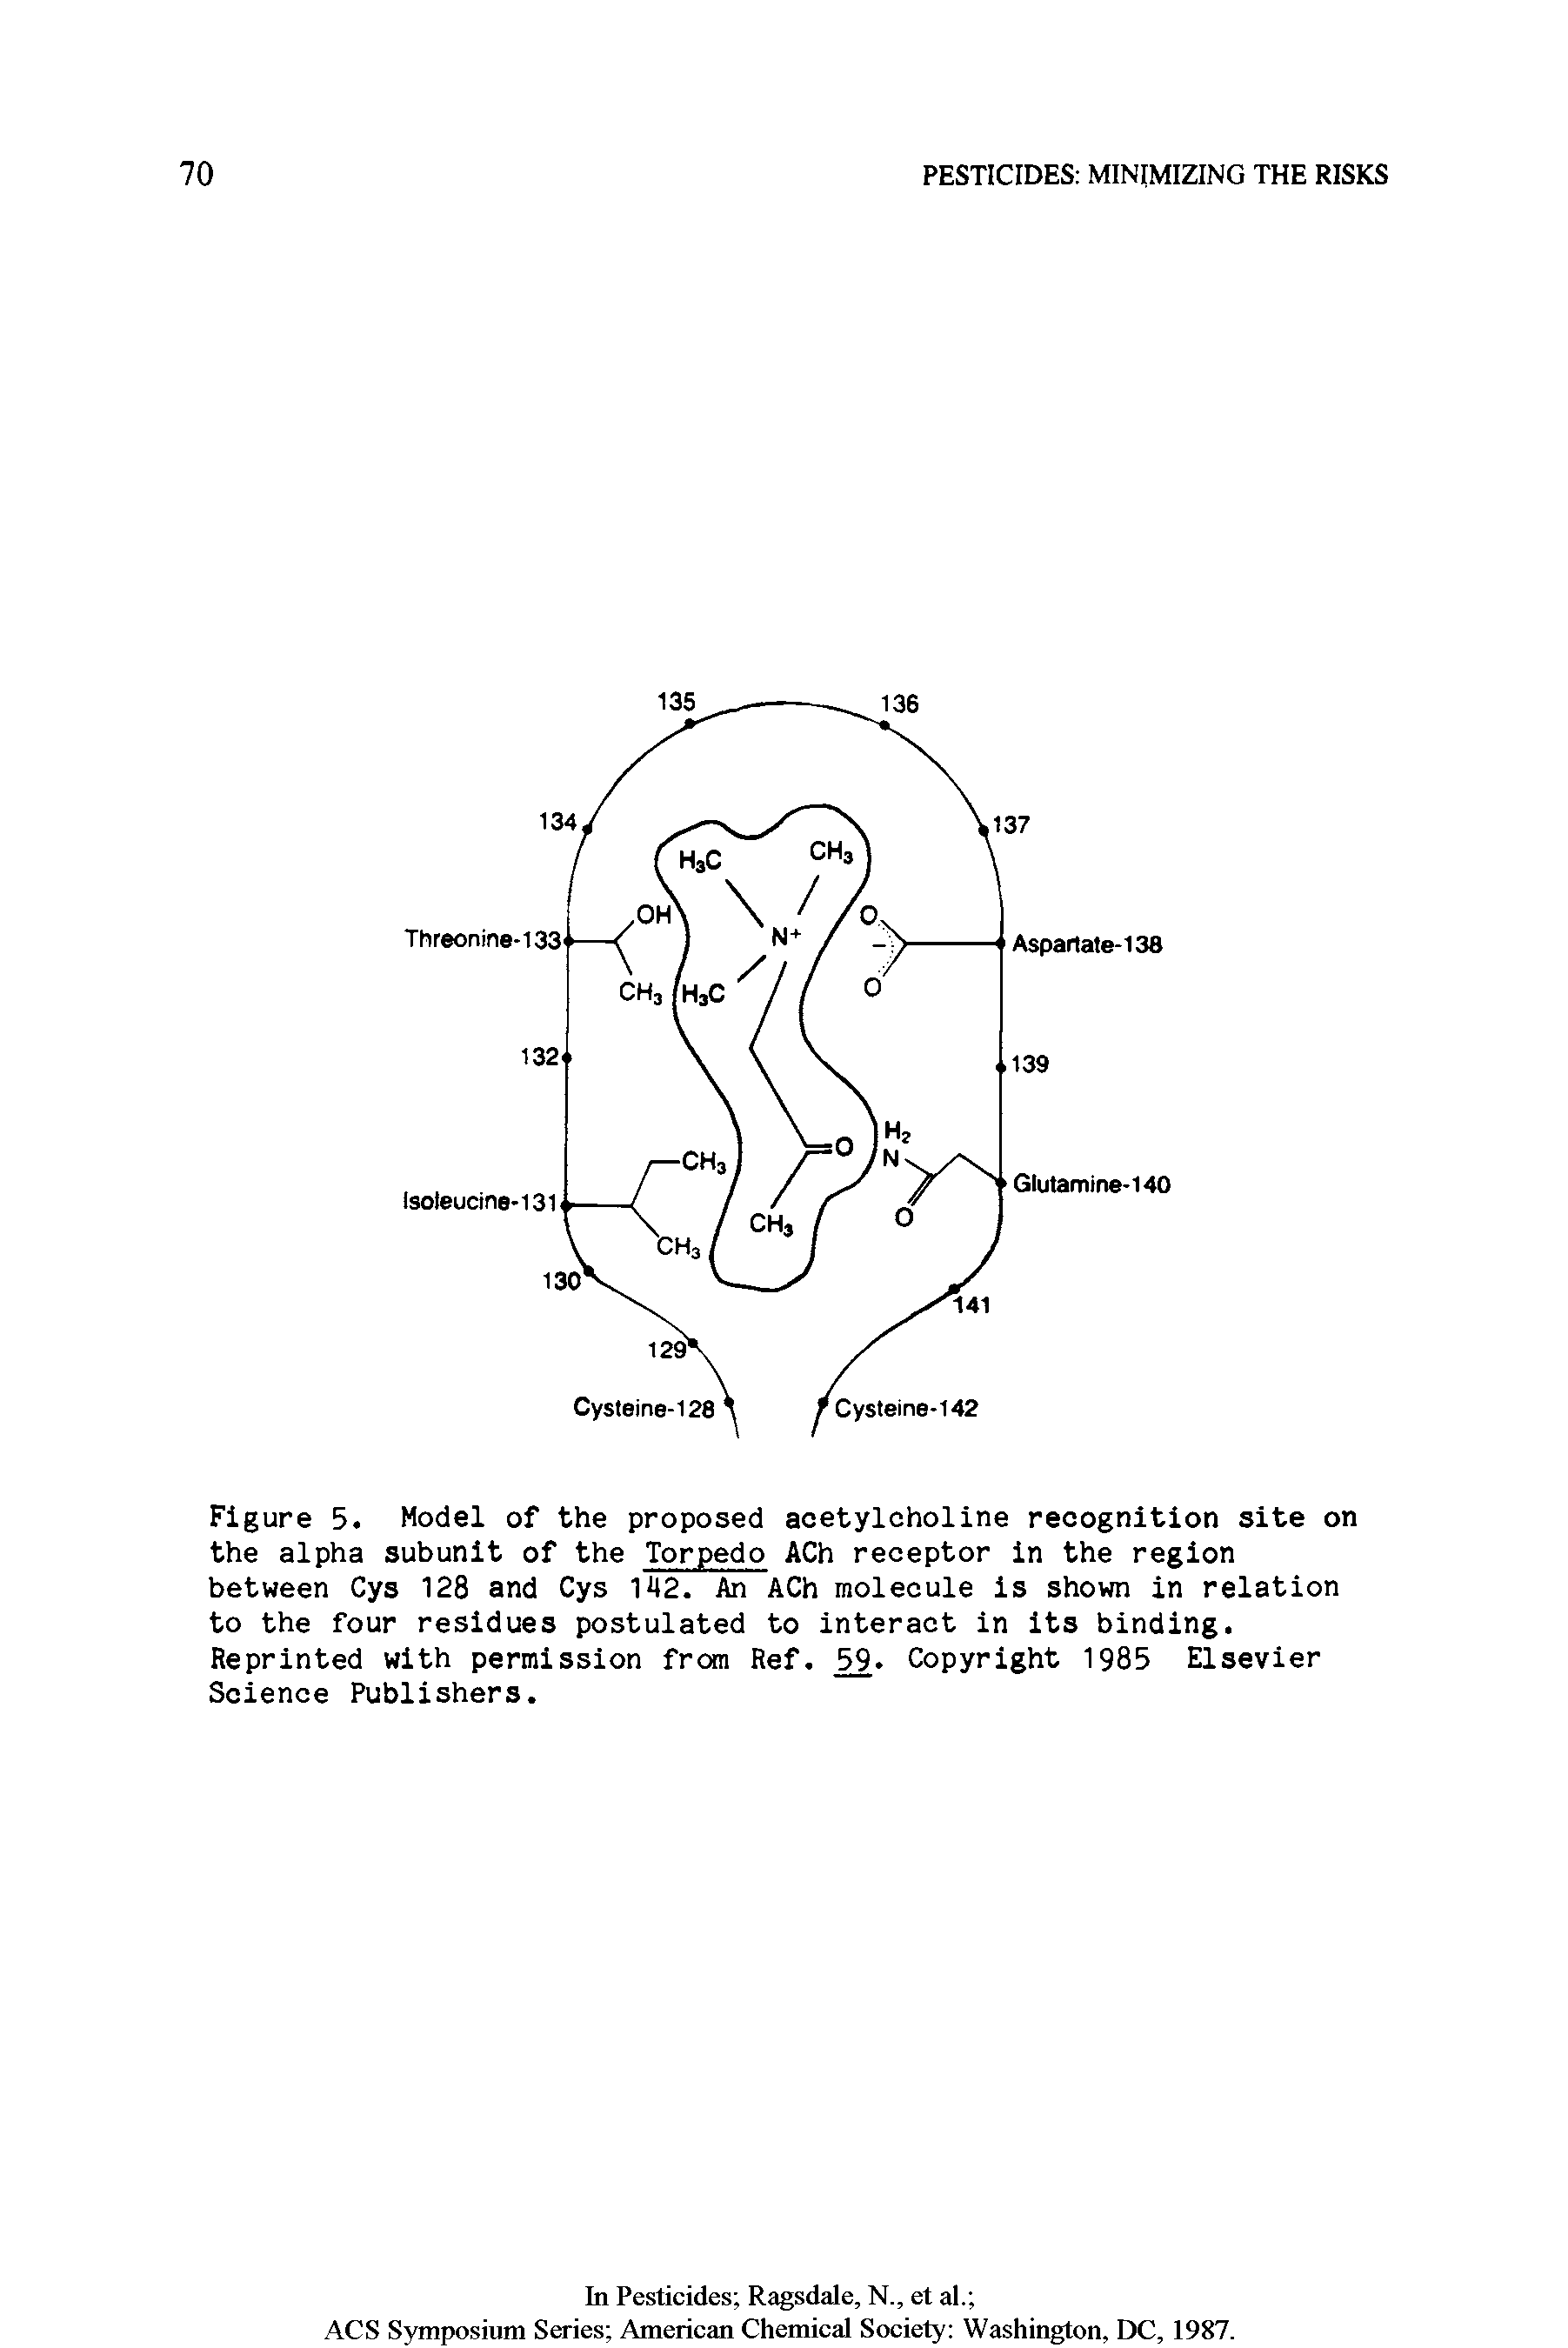 Figure 5. Model of the proposed acetylcholine recognition site on the alpha subunit of the Torpedo ACh receptor in the region between Cys 128 and Cys 142. An ACh molecule is shown in relation to the four residues postulated to interact in its binding. Reprinted with permission from Ref. 9. Copyright 1985 Elsevier Science Publishers.